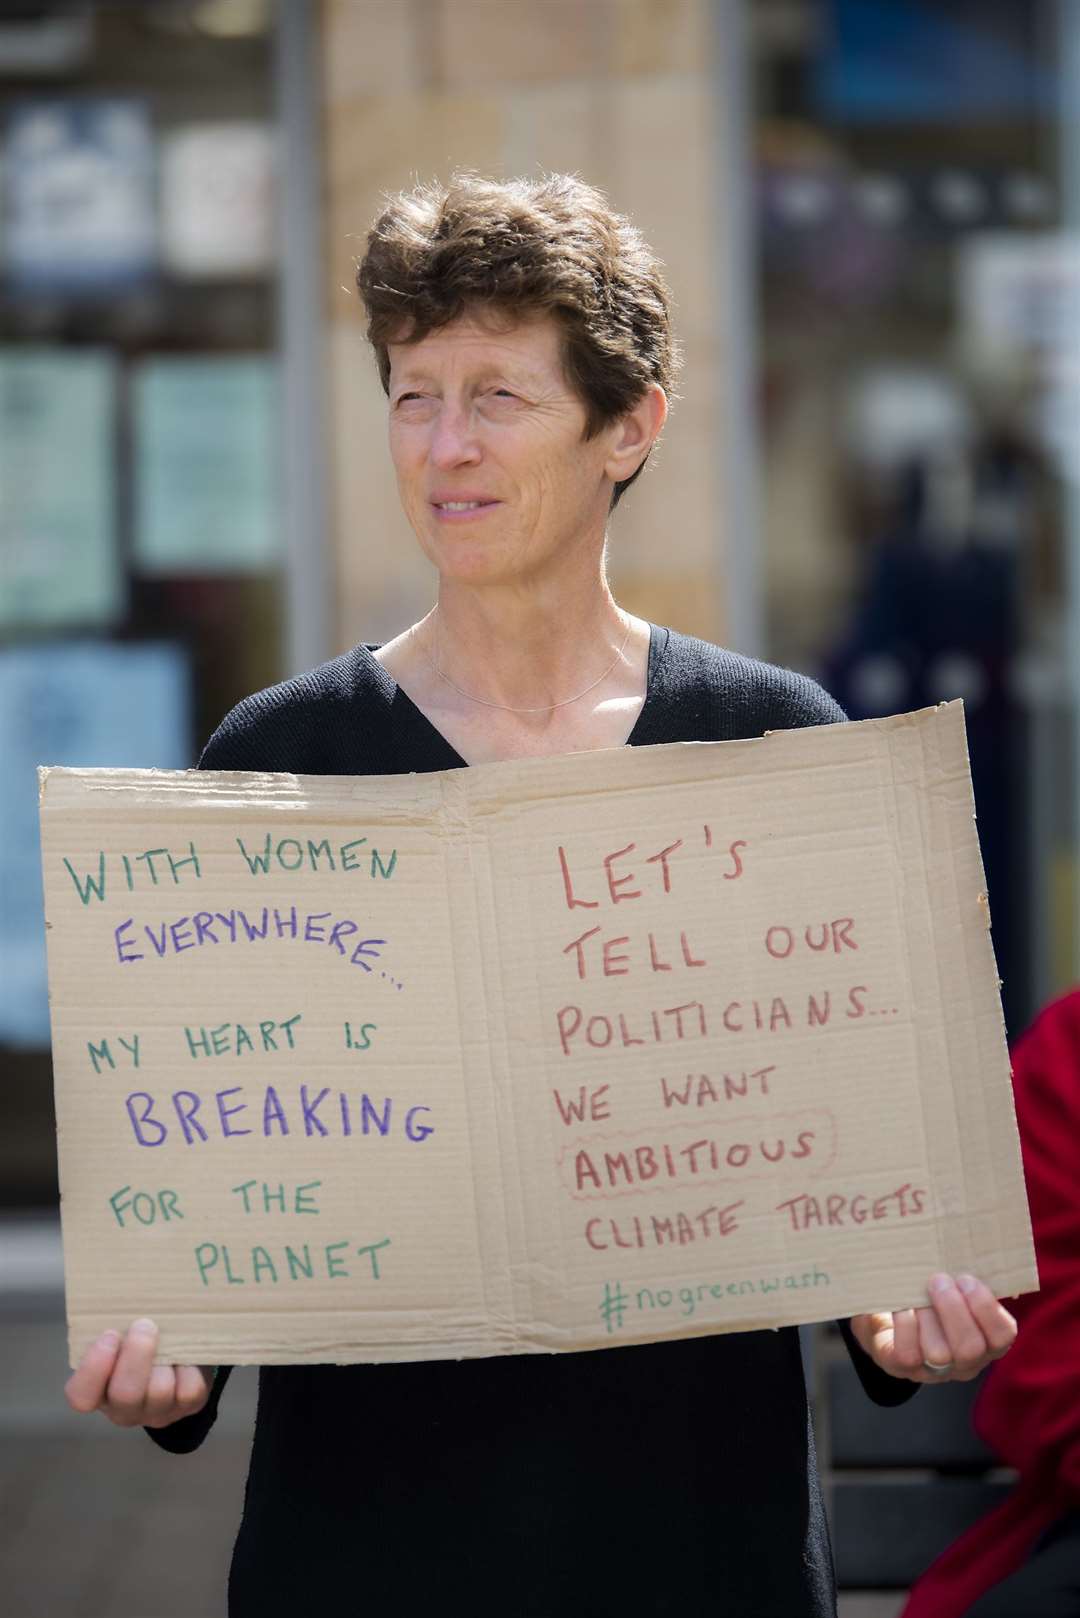 Encouraging women to make a stand. Picture by Mark Richards.